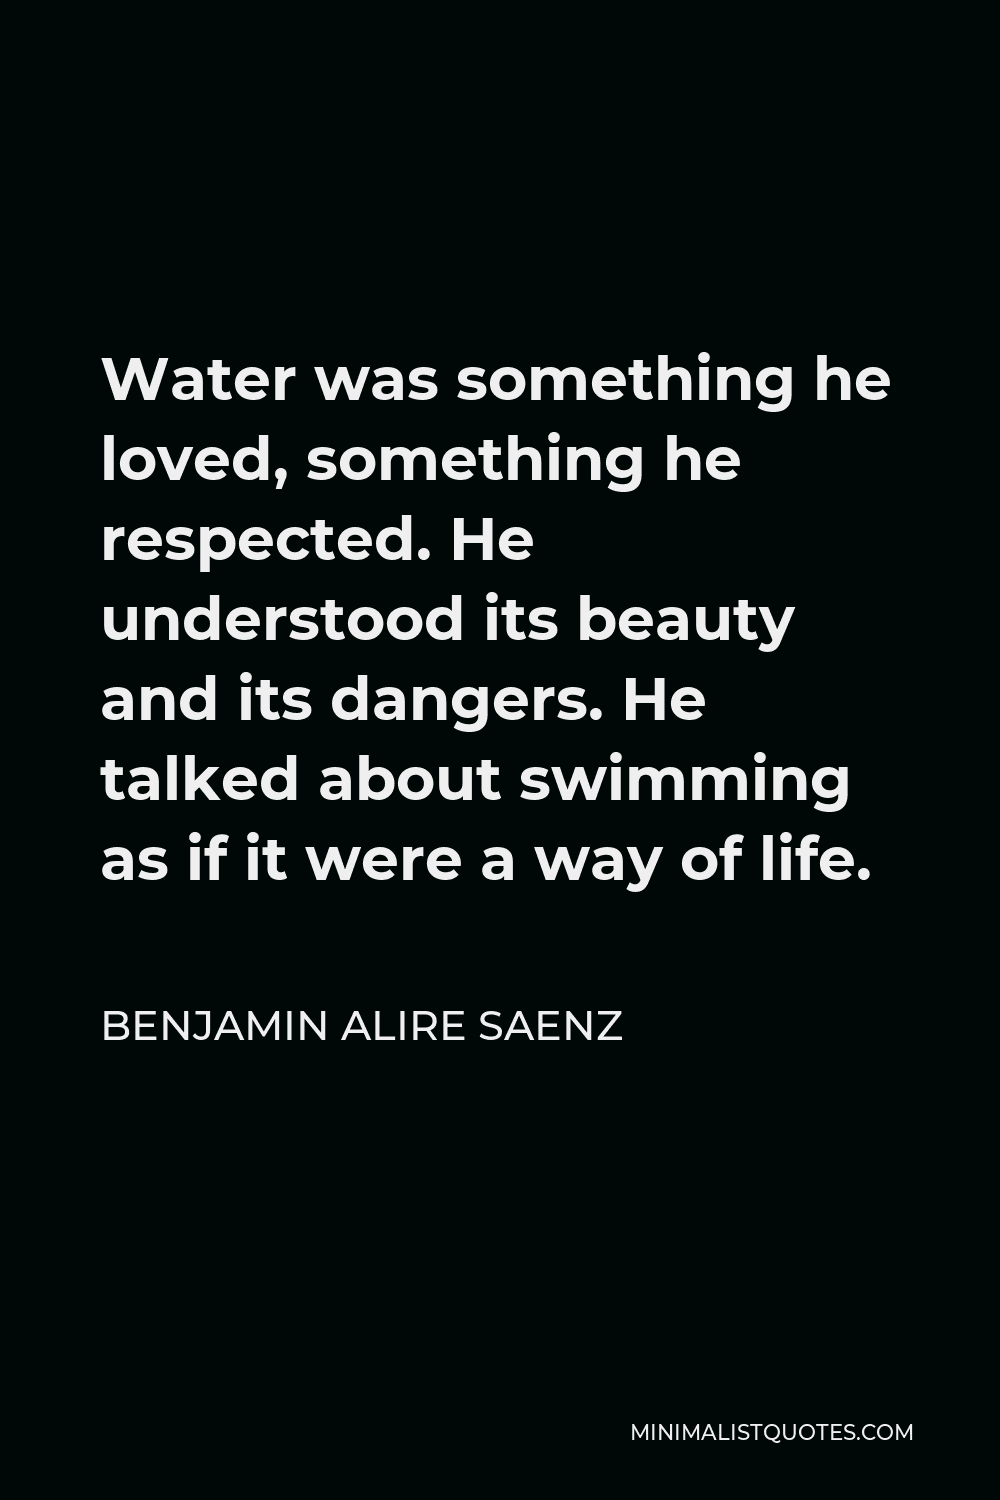 Benjamin Alire Saenz Quote - Water was something he loved, something he respected. He understood its beauty and its dangers. He talked about swimming as if it were a way of life.